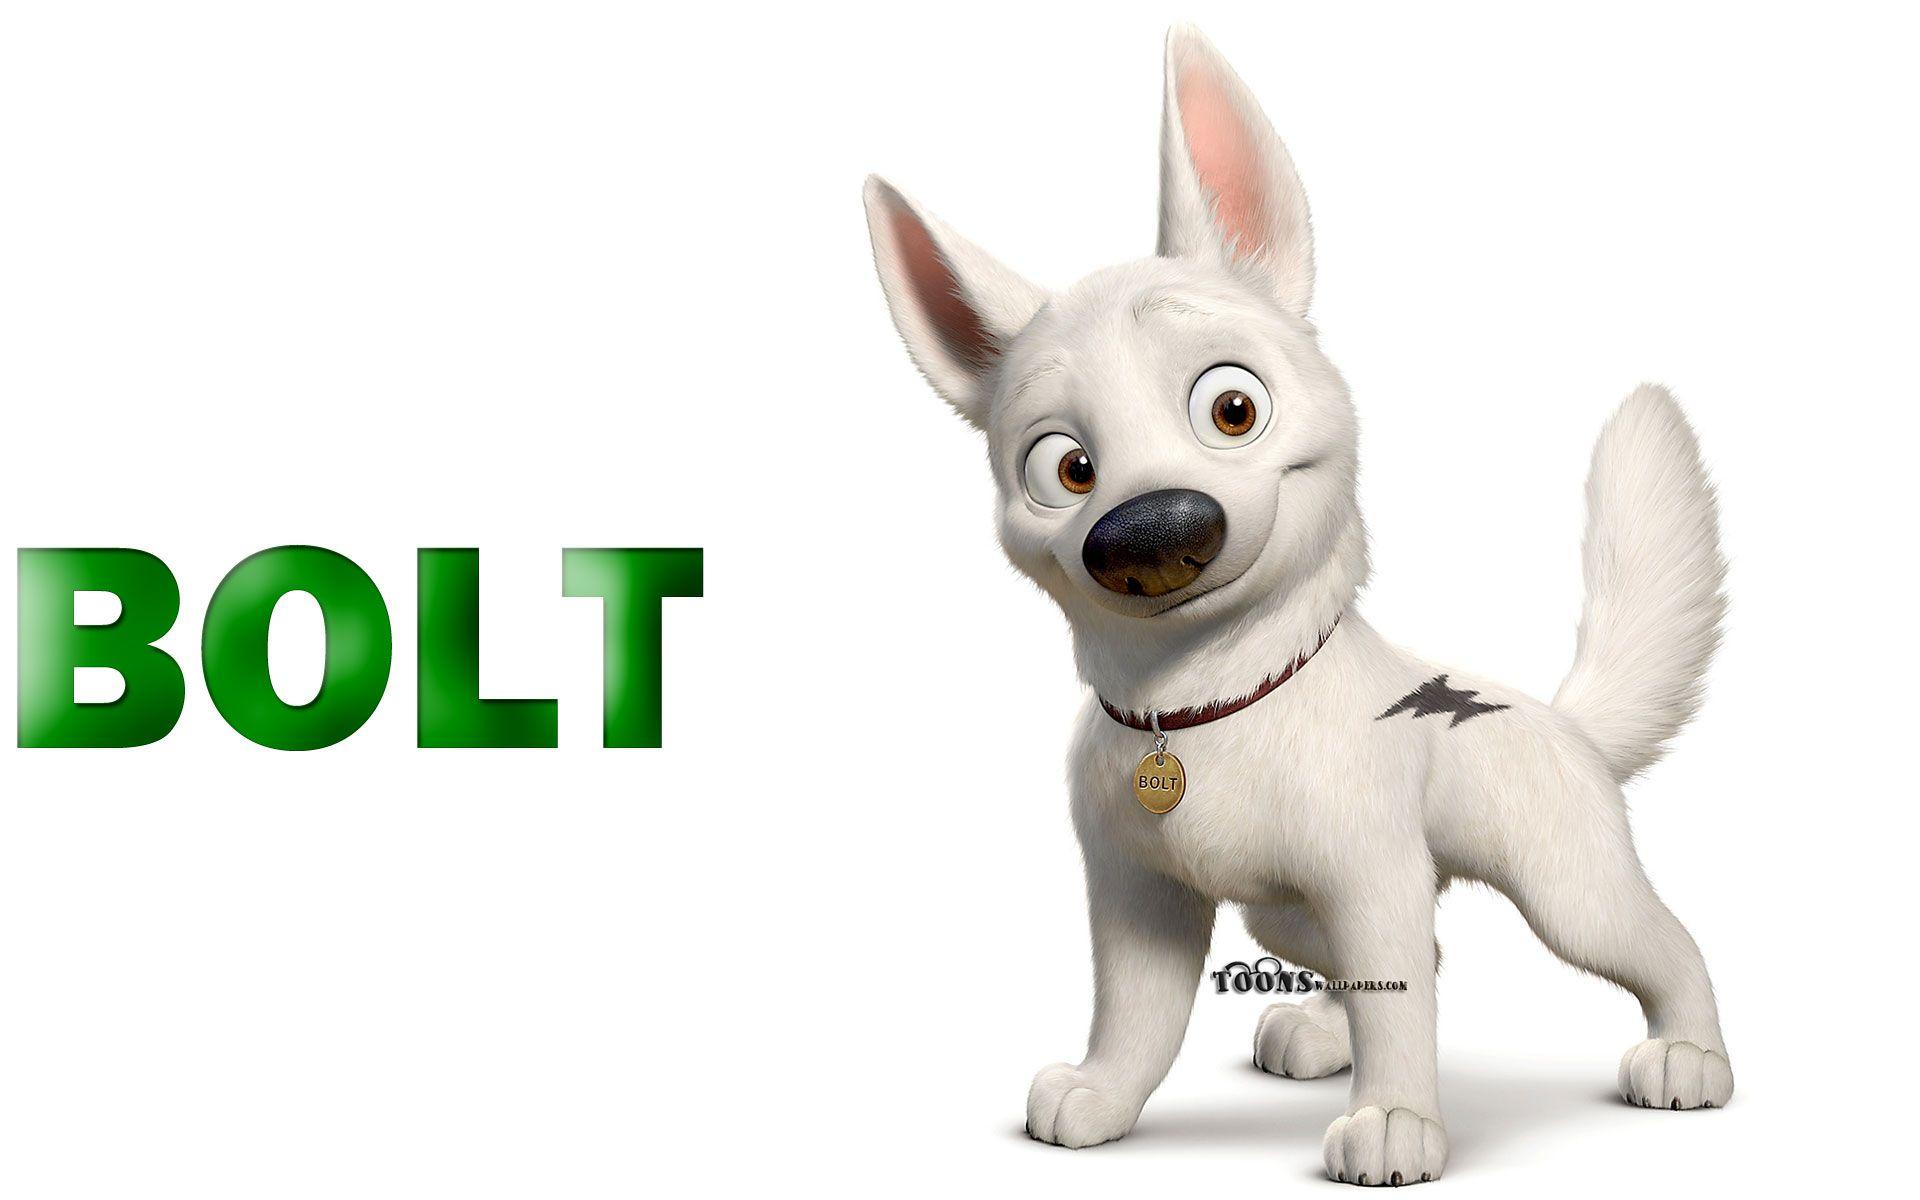 Bolt Mighty Dog 1920x1200 wallpaper. Movie wallpaper, Disney movie posters, Disney movie characters